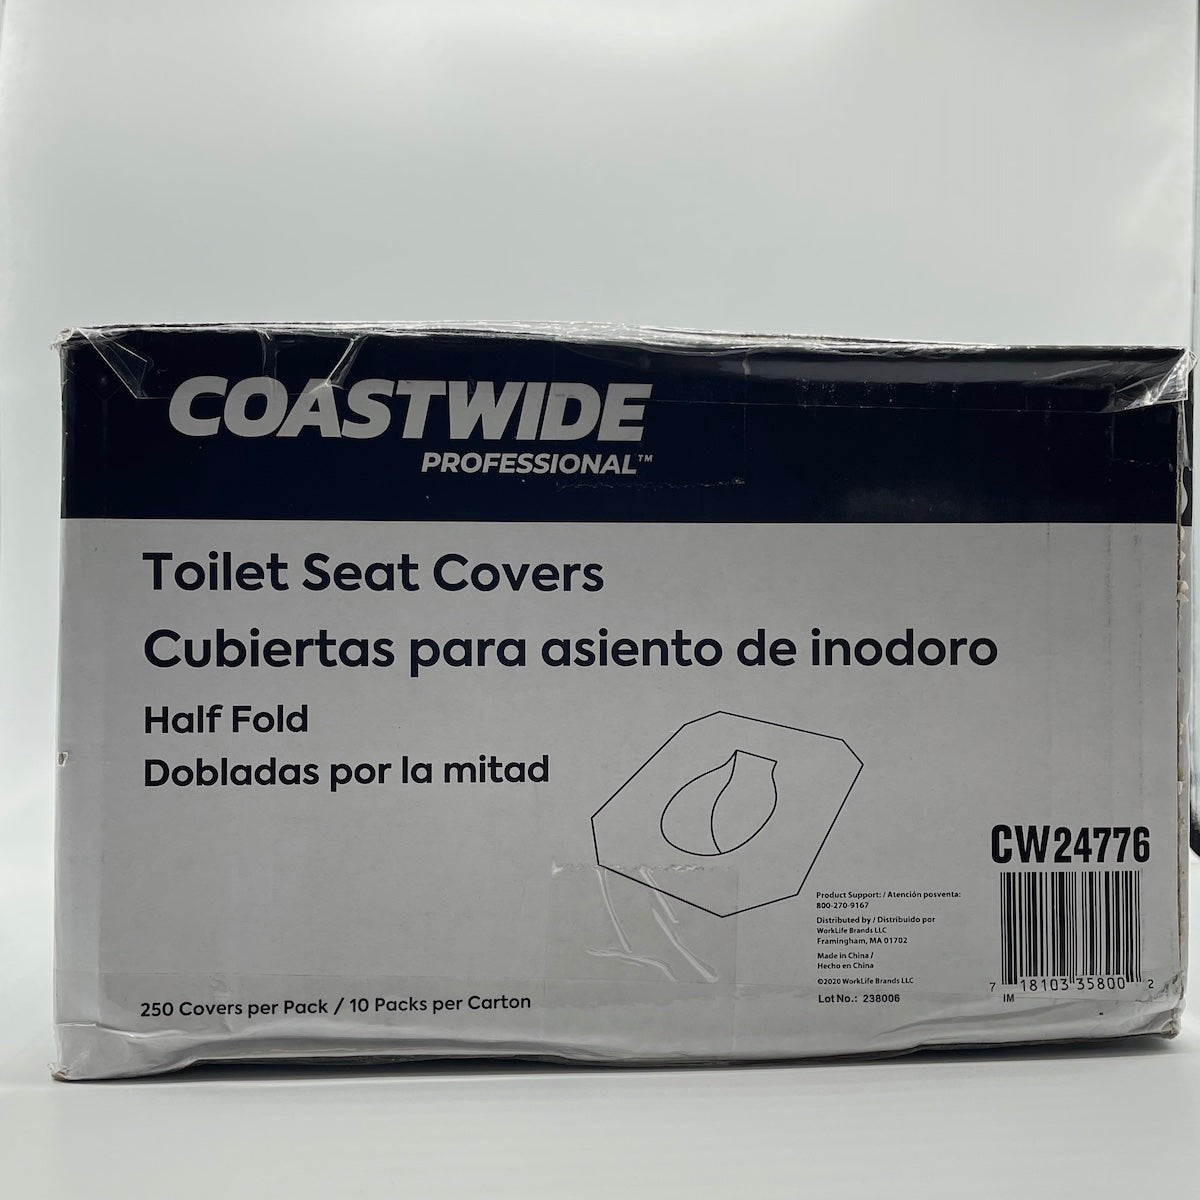 Coastwide Professional™ Toilet Seat Covers, 0.87" x 10.43", 250/Pack, 10 Packs/Carton